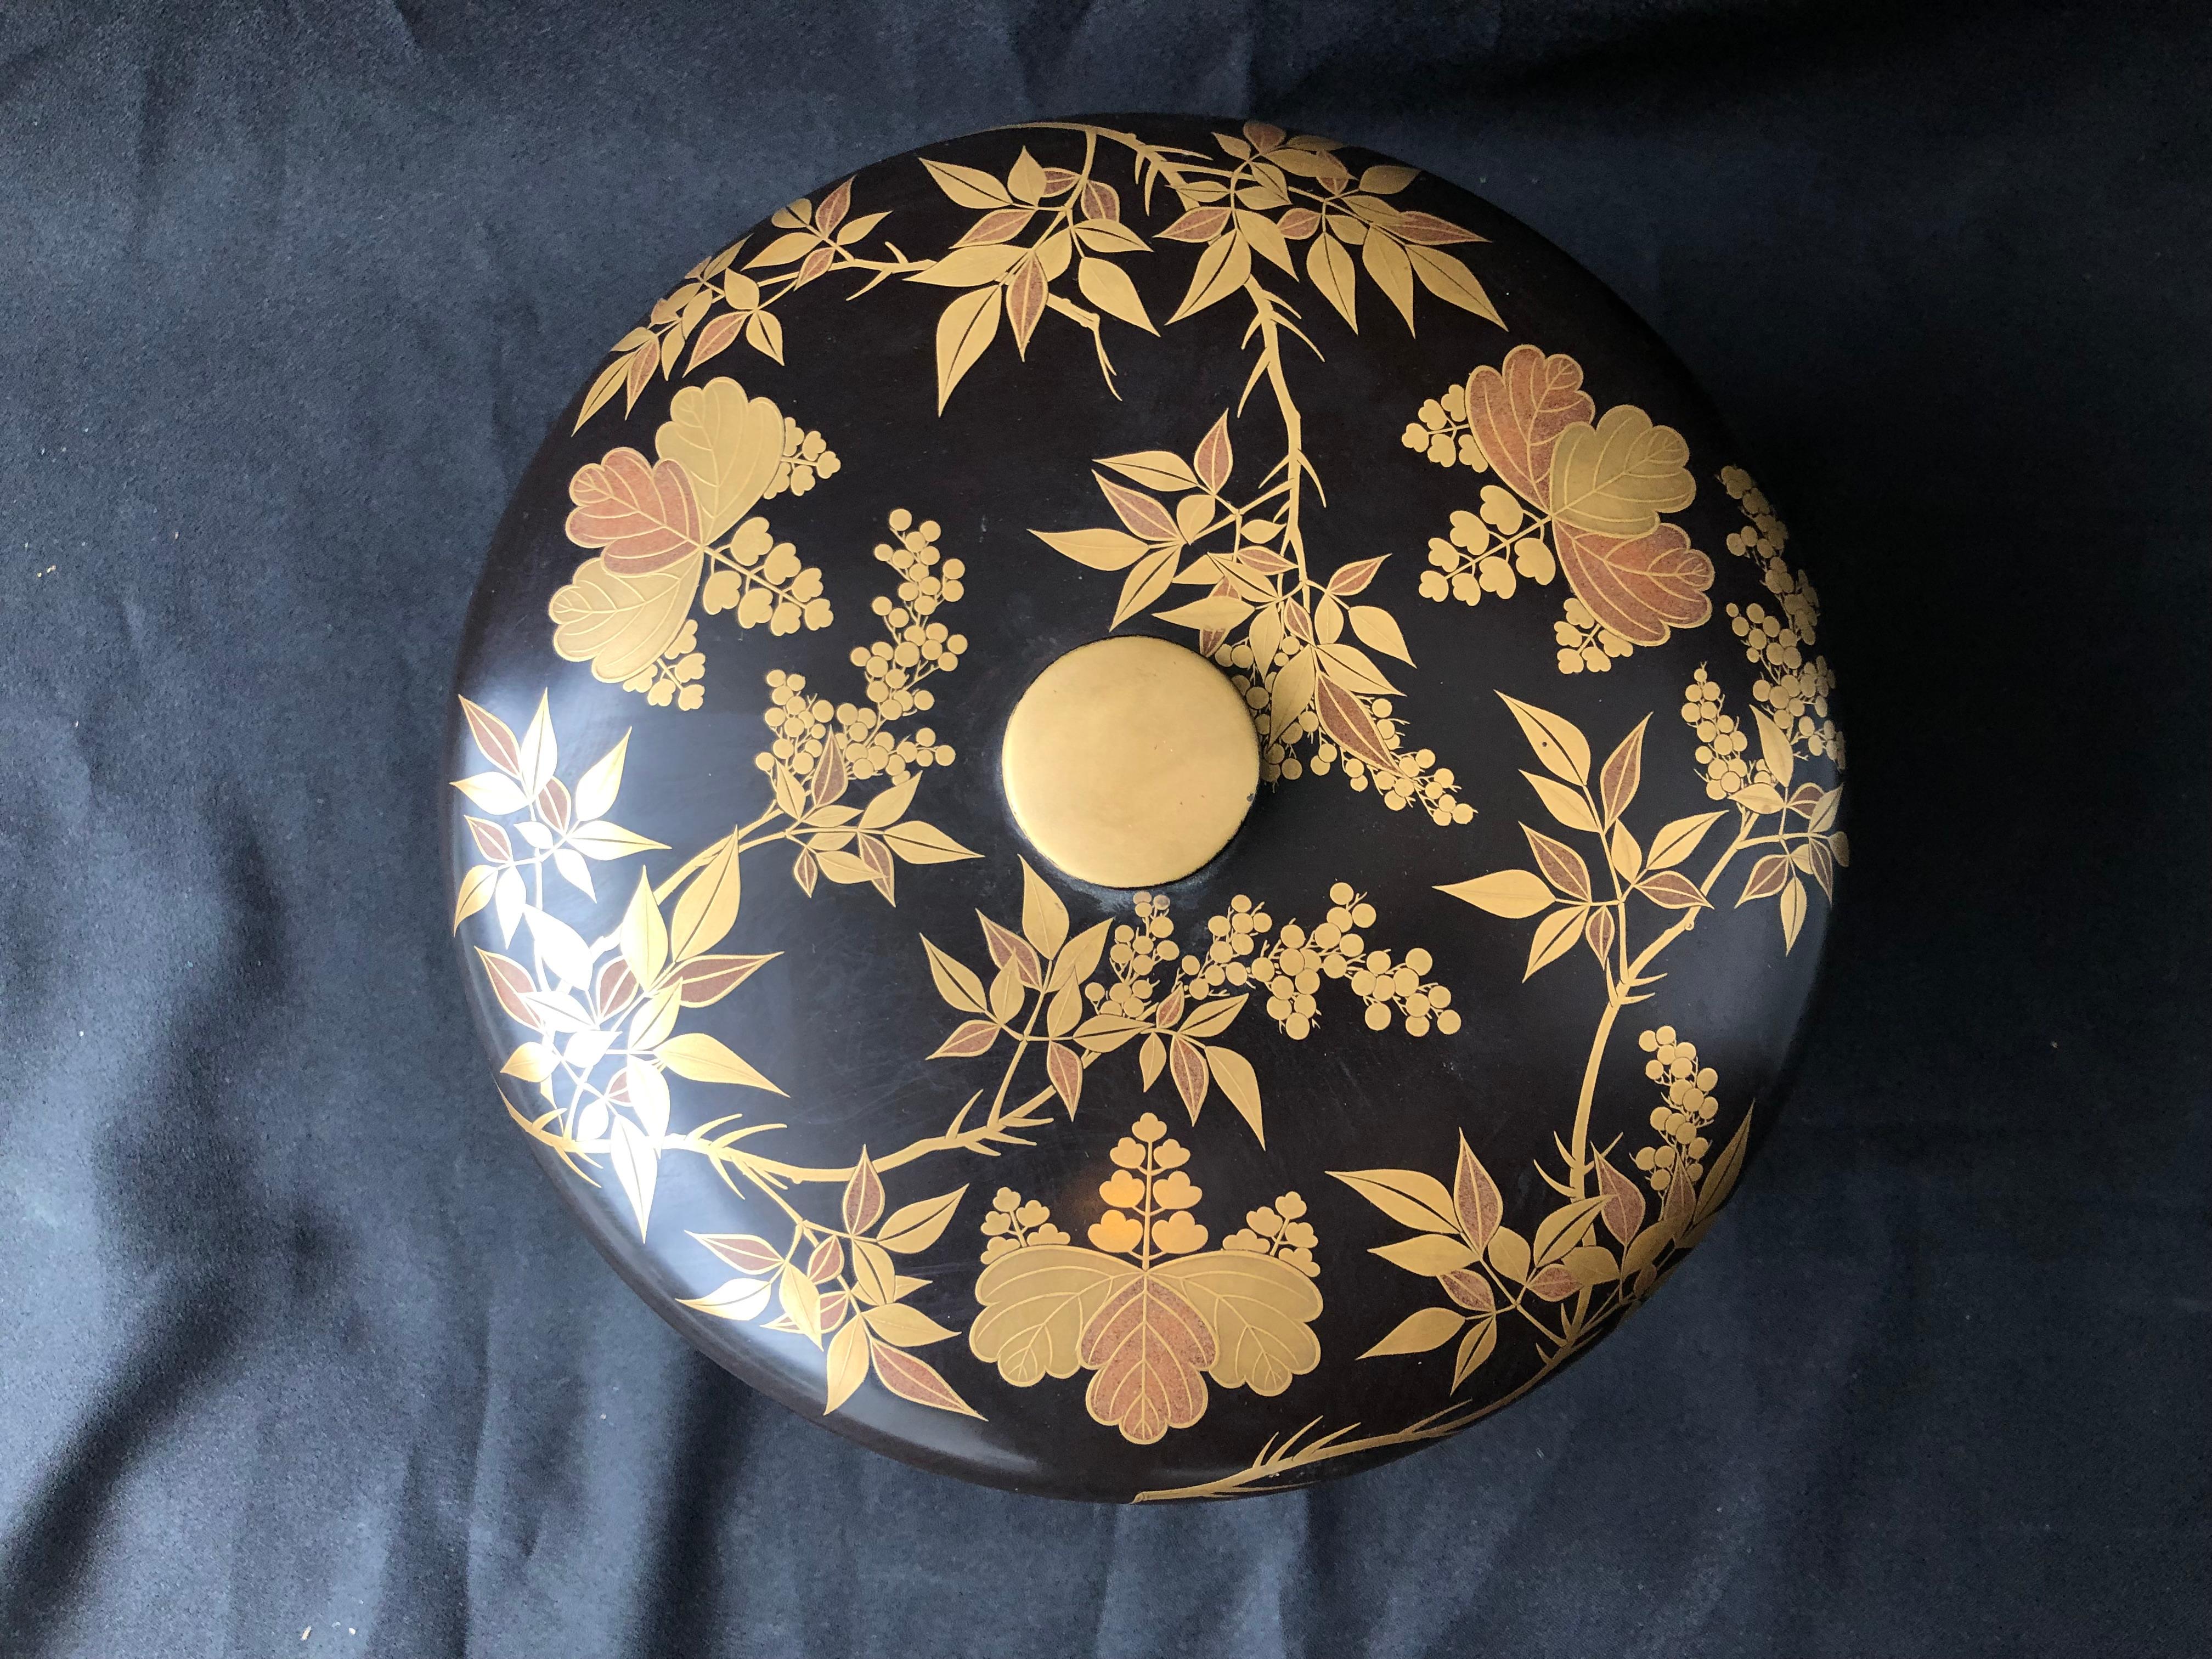 A nice Japanese lacquer box with floral decoration.